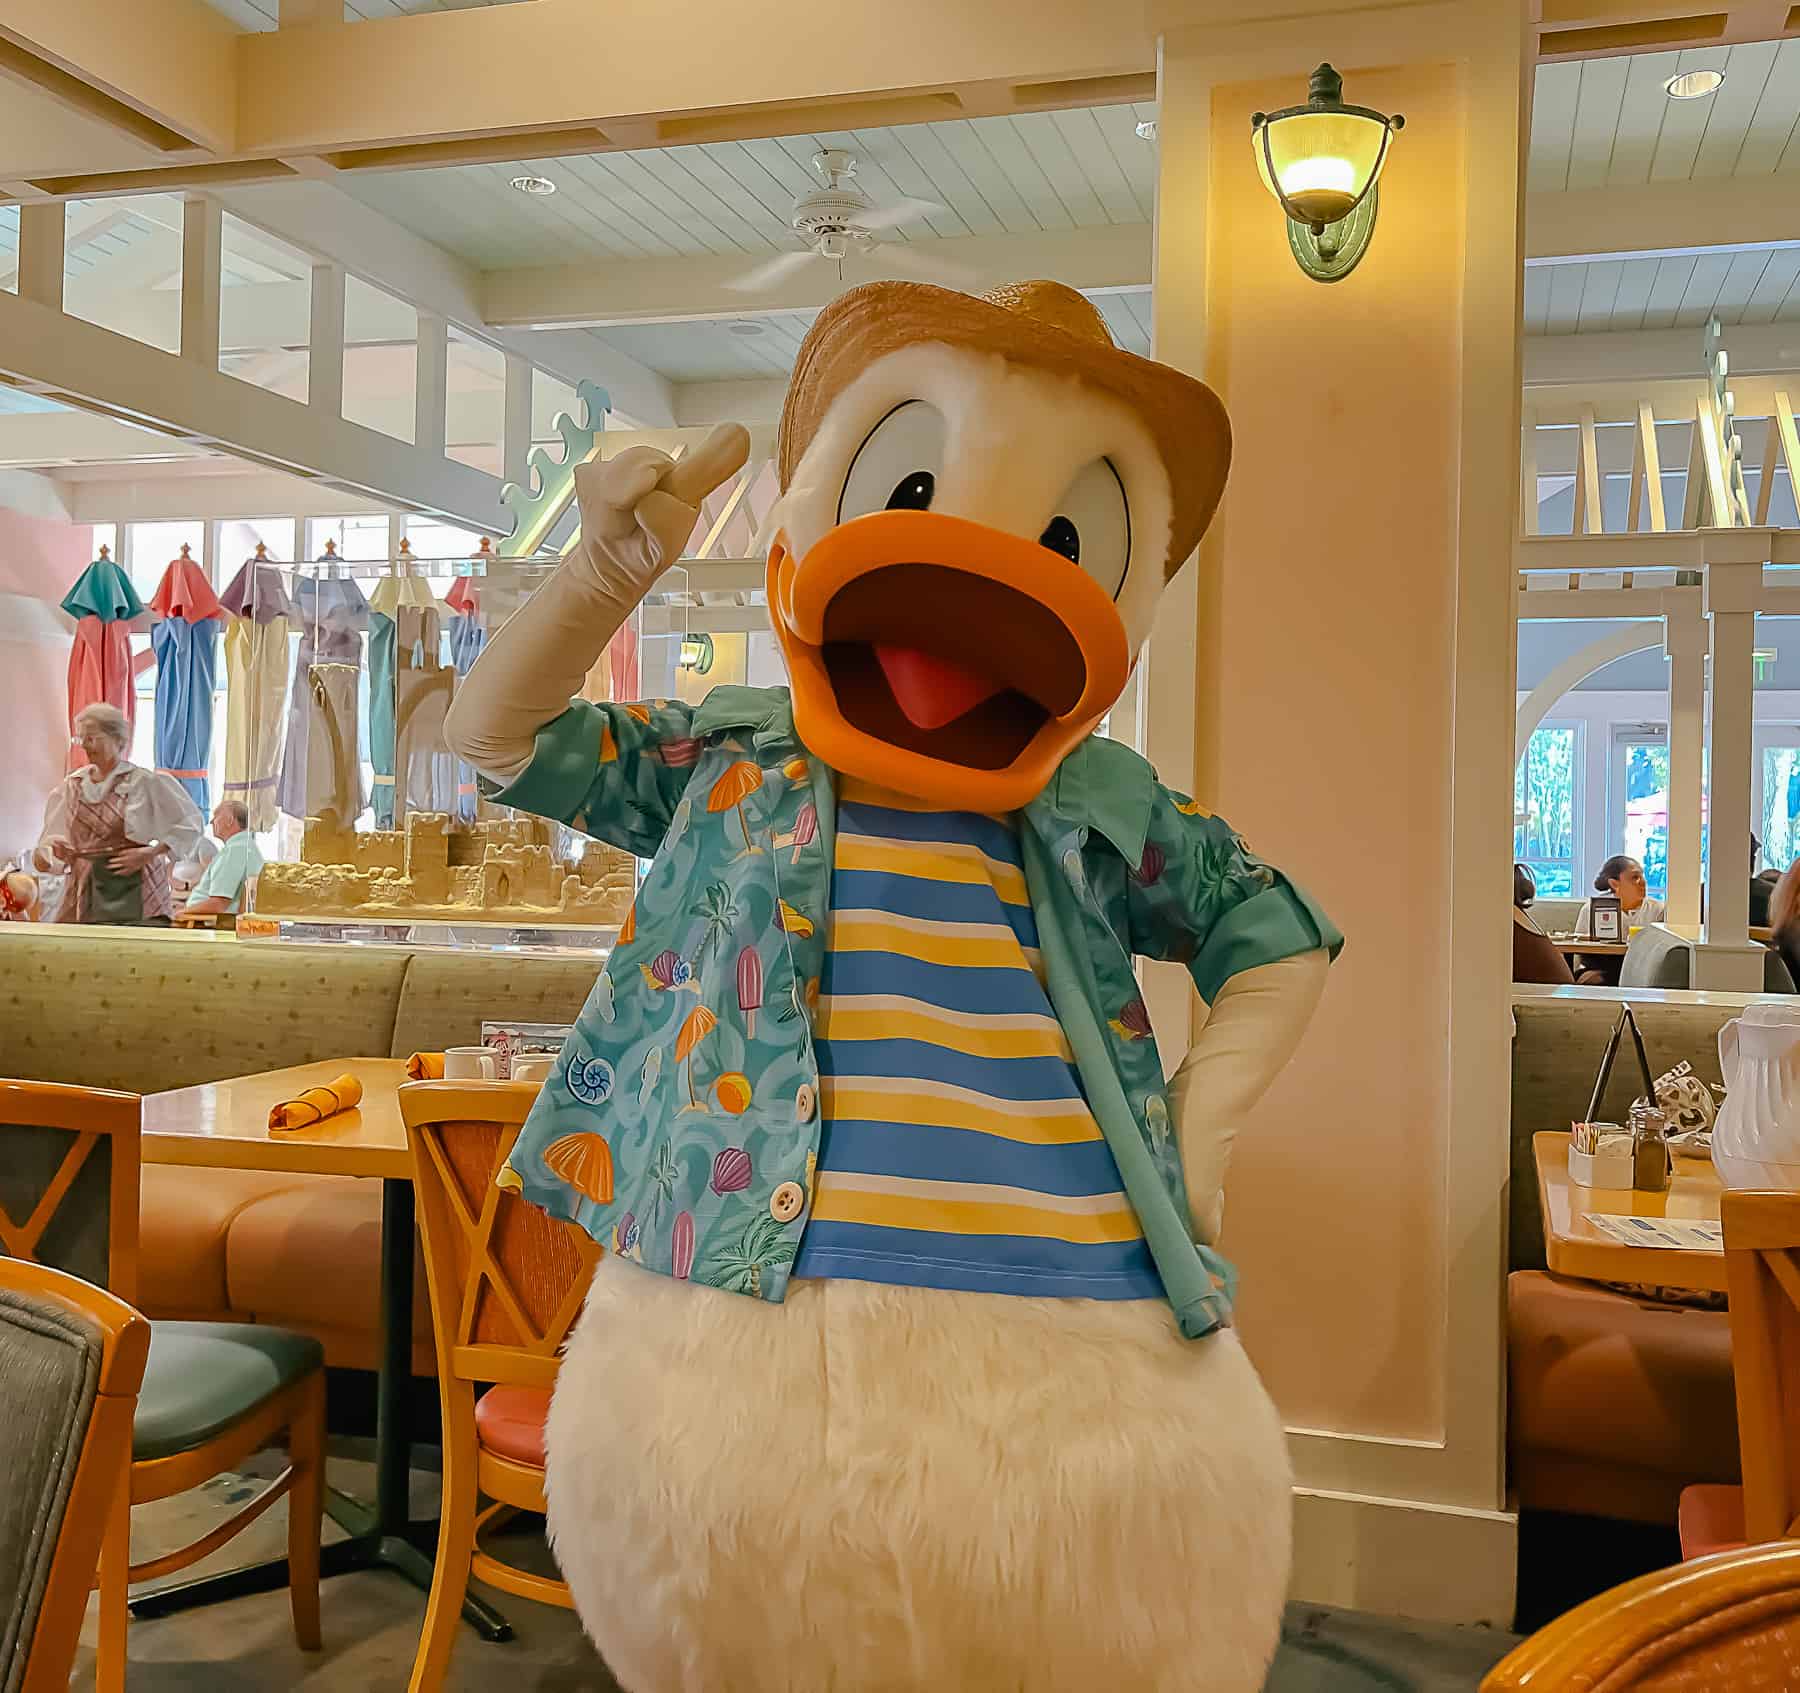 Donald Duck poses in a striped shirt with button up over it at Cape May Cafe 